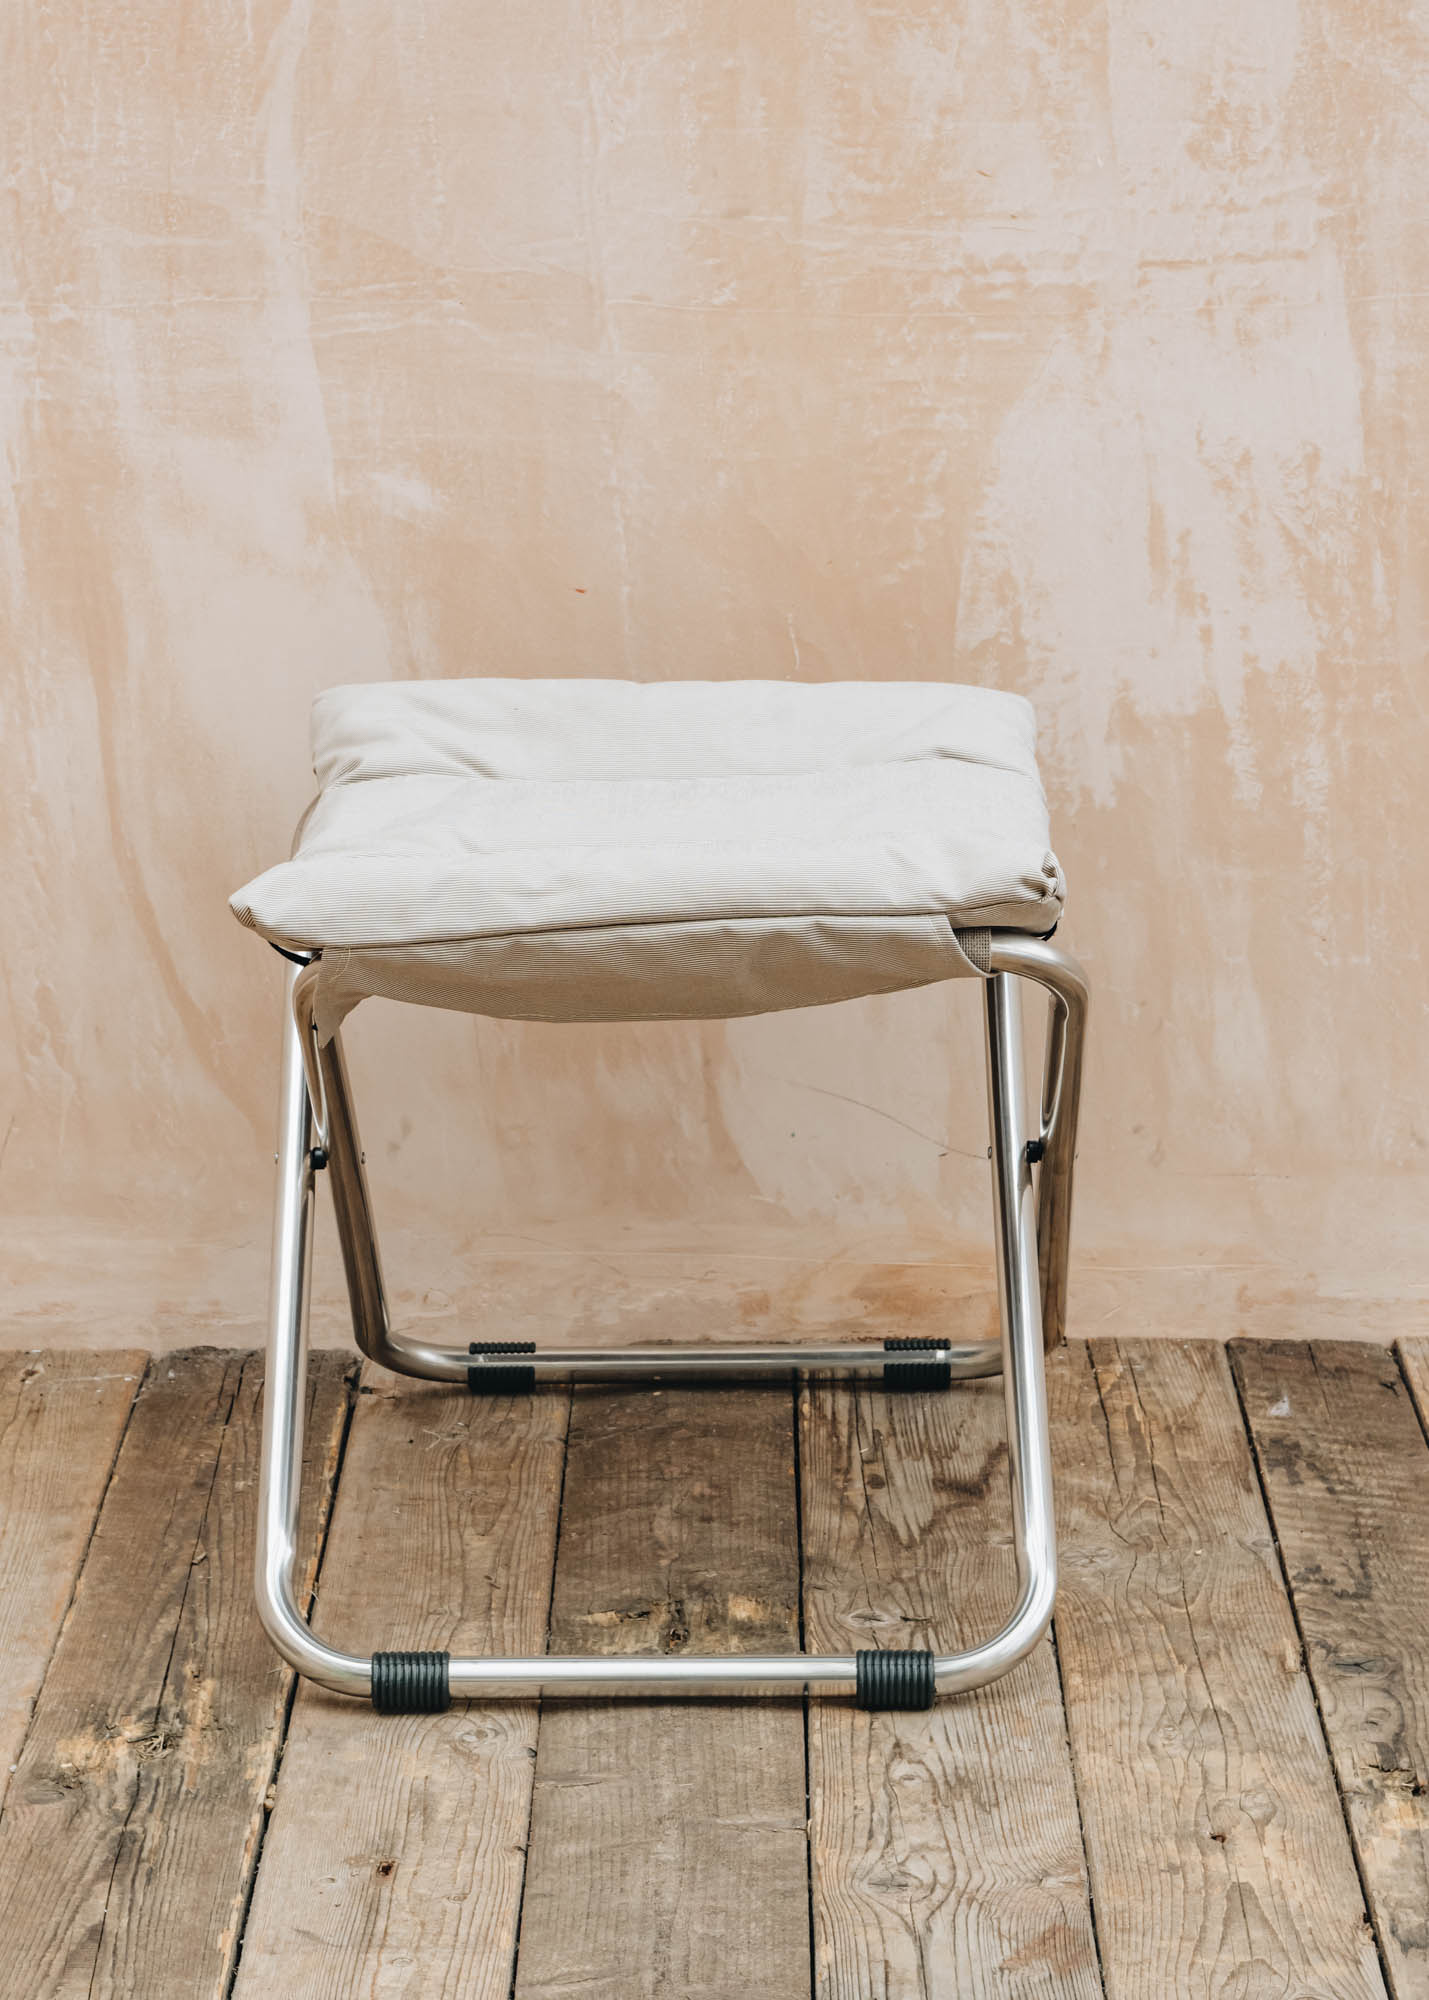 Fiam Spa Chico Stool in White and Beige